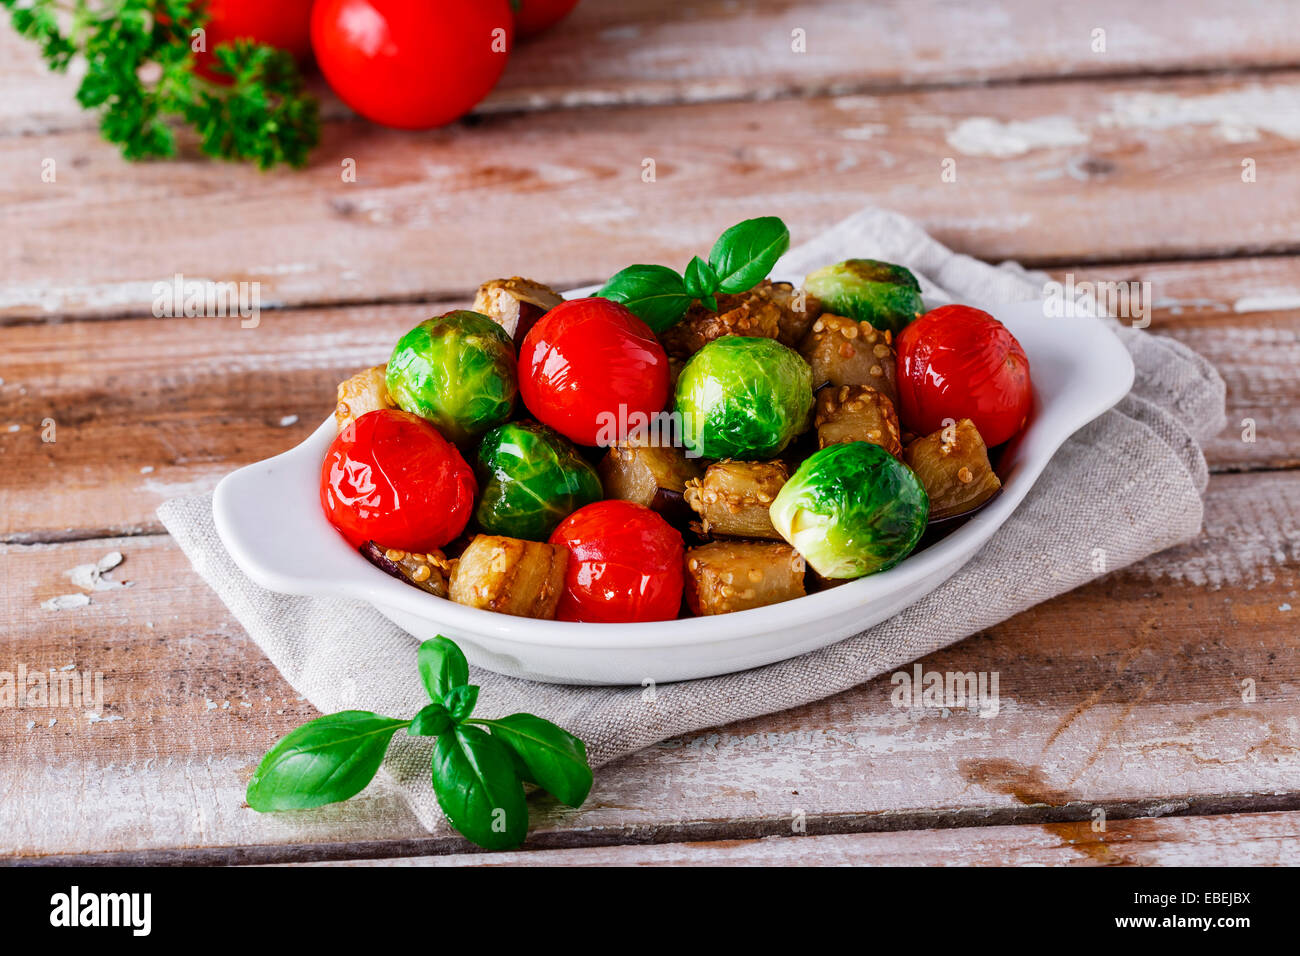 roasted vegetables eggplant, brussel sprouts, tomatoes basil Stock Photo